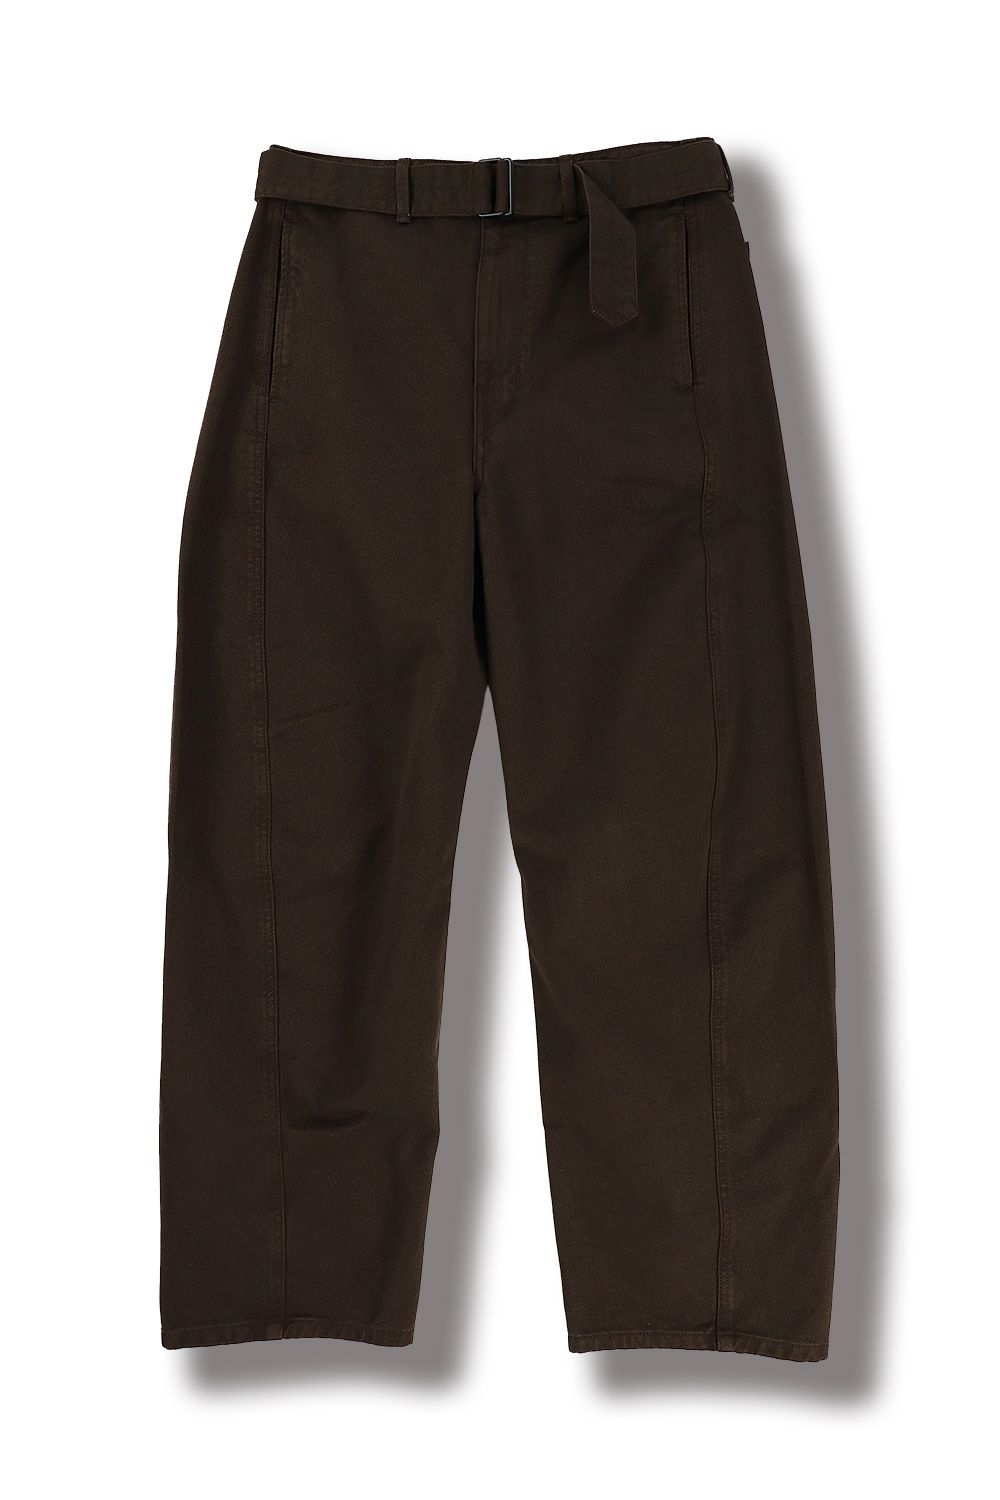 LEMAIRE 【23AW】TWISTED BELTED PANTS(ESPRESSO) Acacia ONLINESTORE